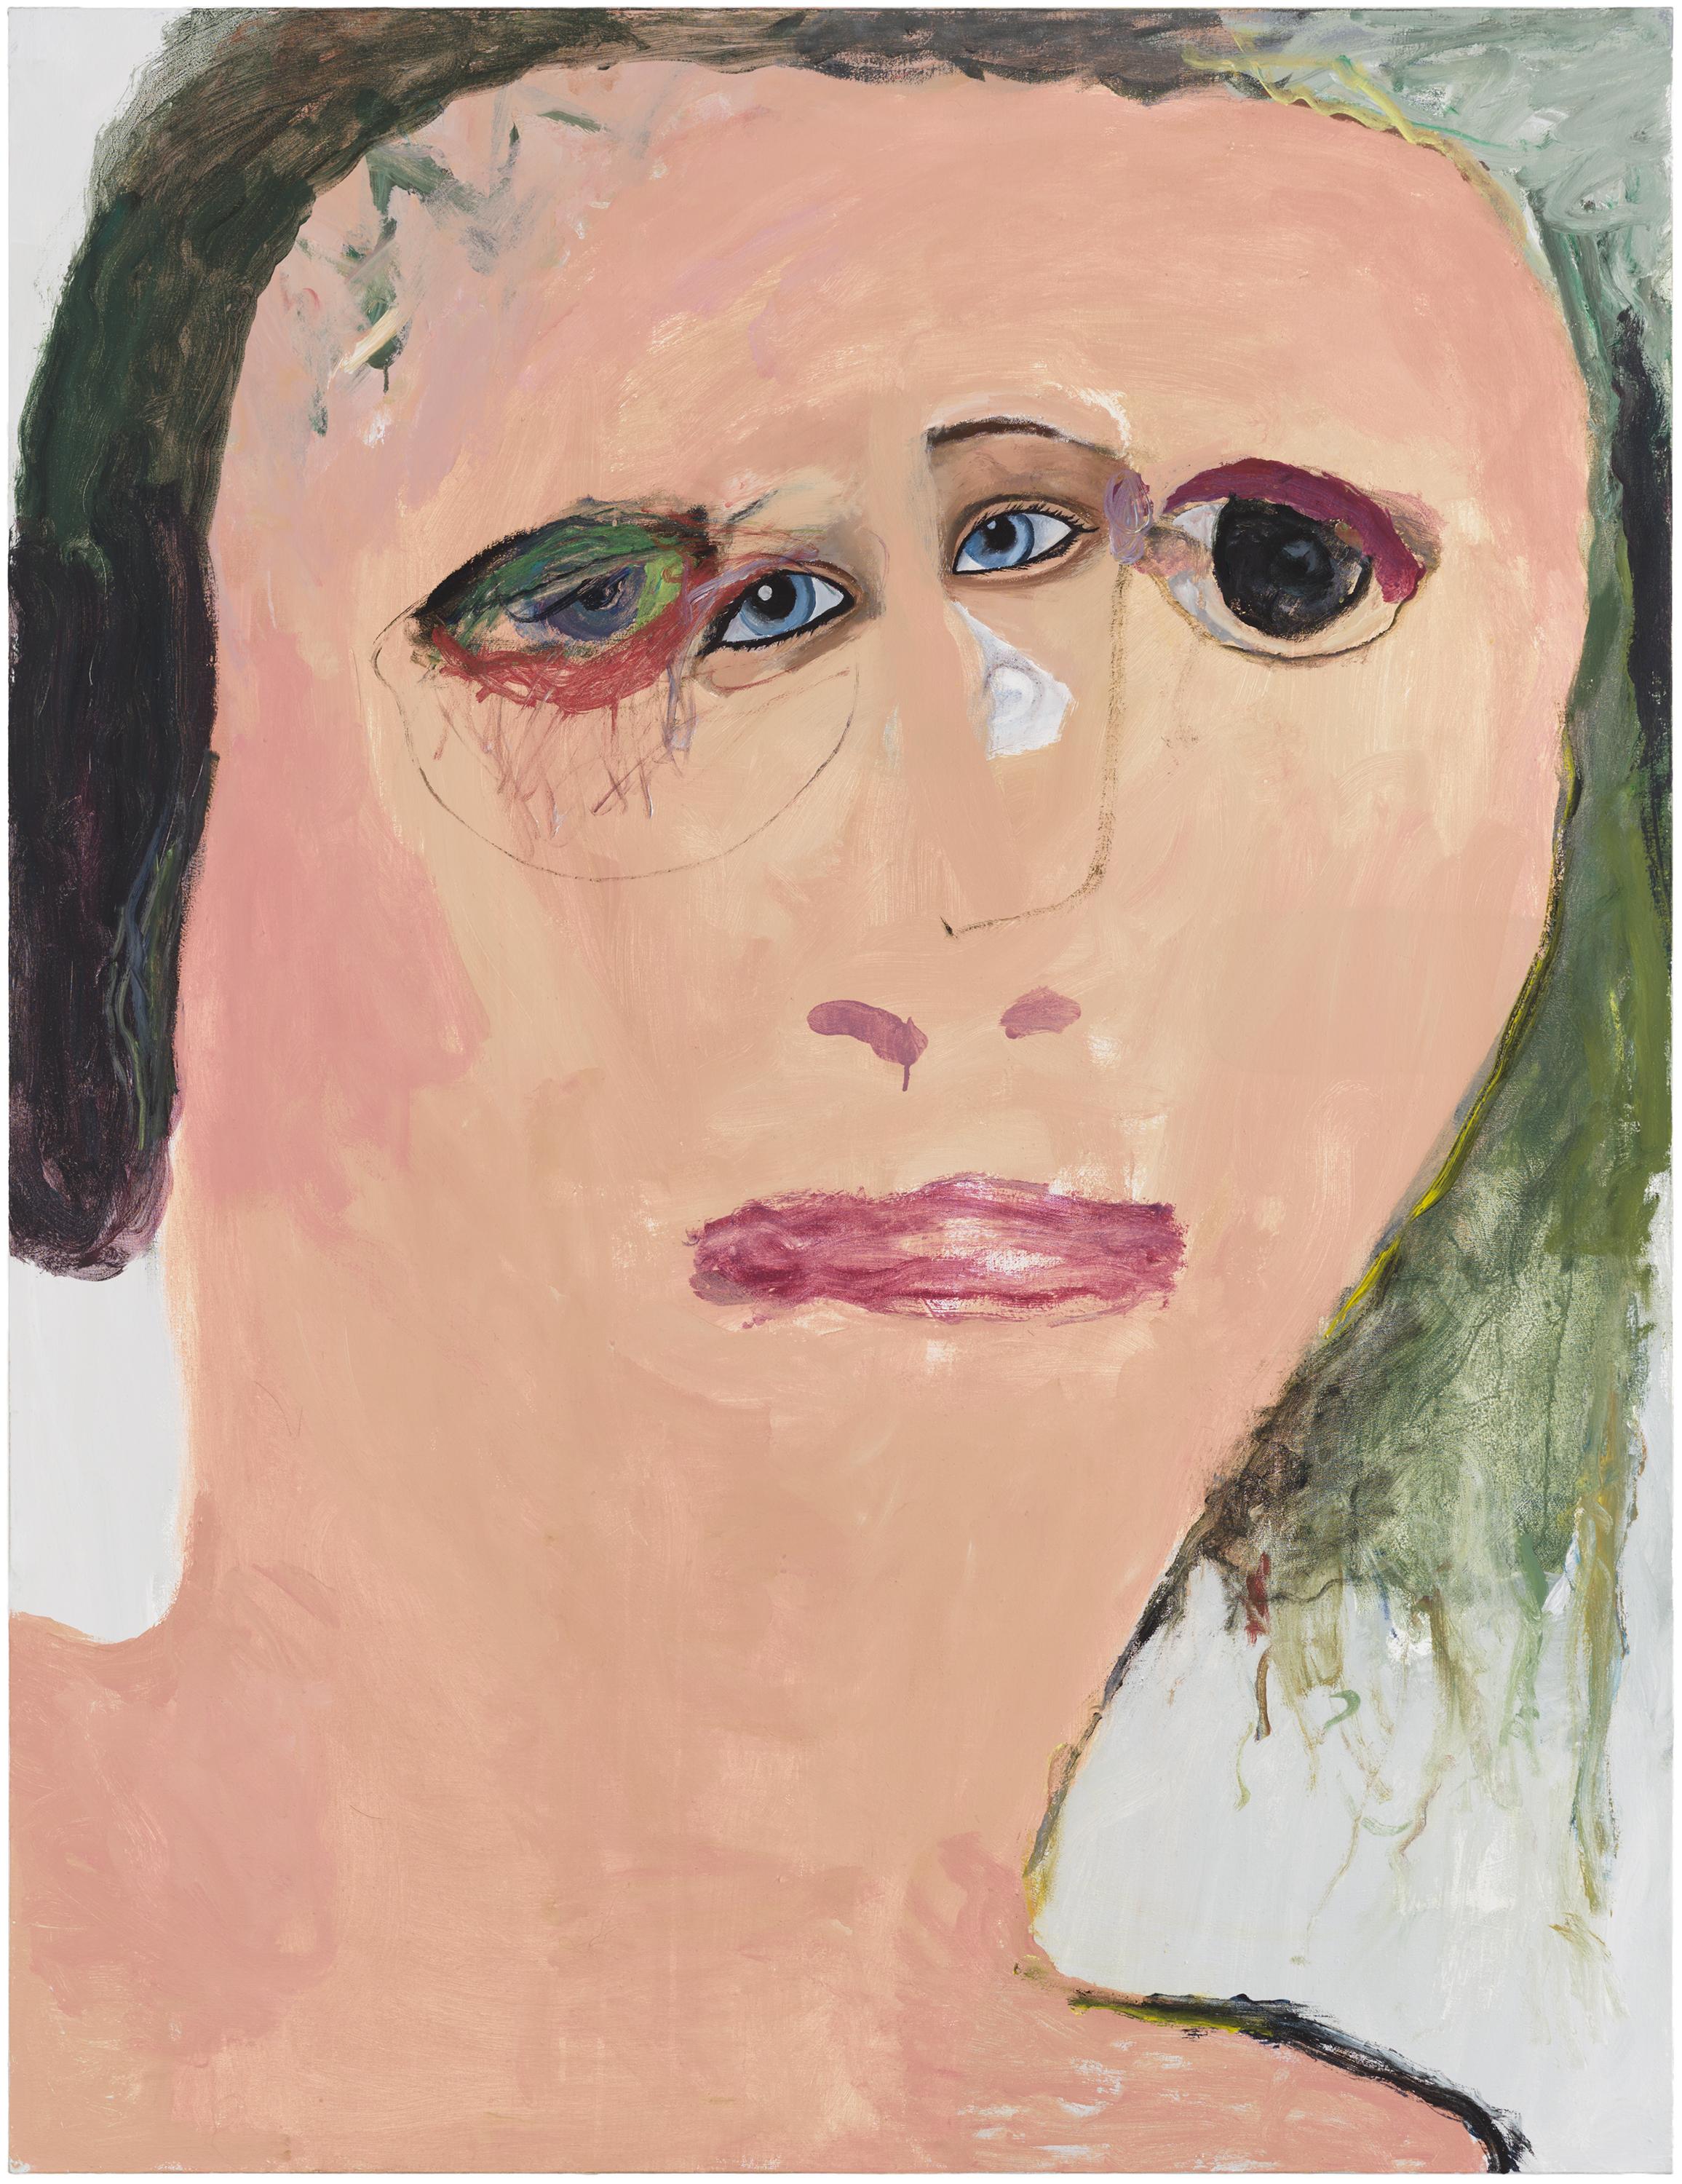 A closely cropped portrait of a pink-skinned woman's face is painted in loose brushstrokes. Between her eyes is another, smaller pair of blue eyes and eyebrows, rendered in a more realistic style and tilted to the left.